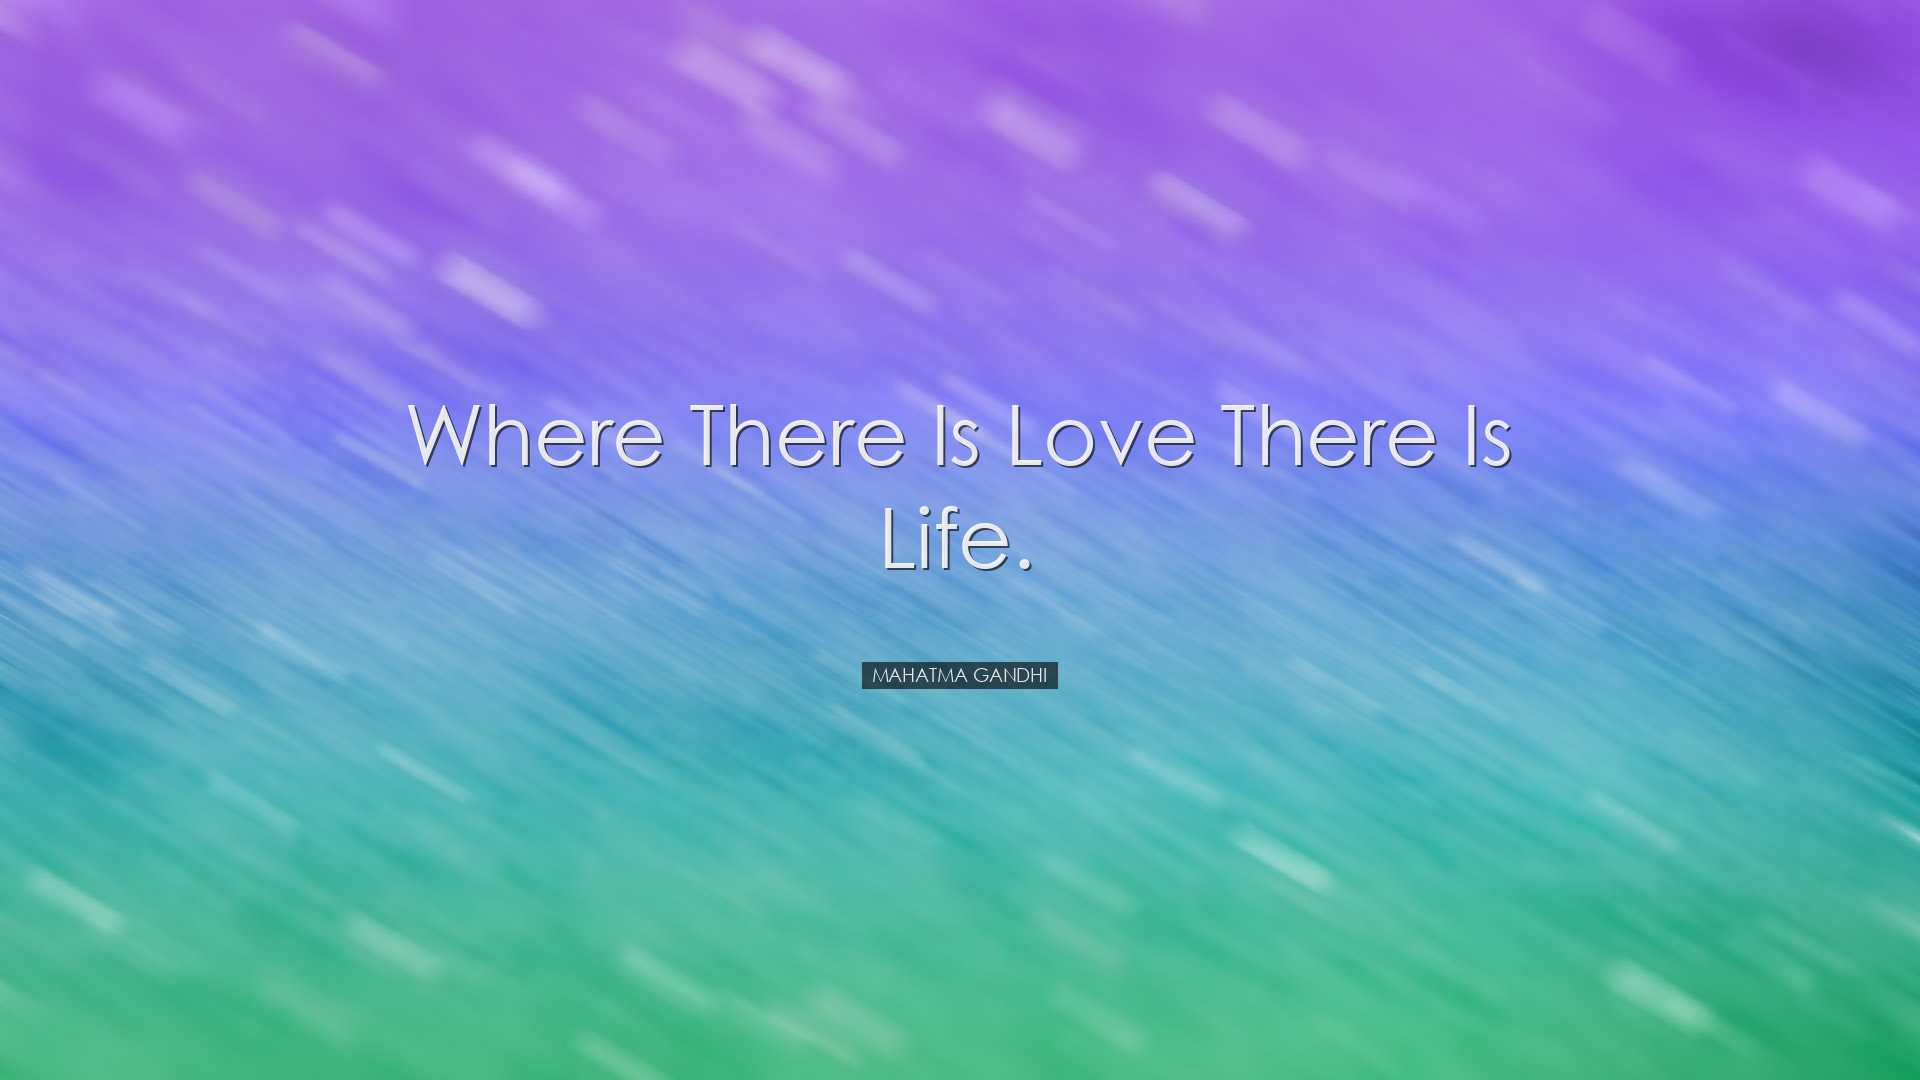 Where there is love there is life. - Mahatma Gandhi